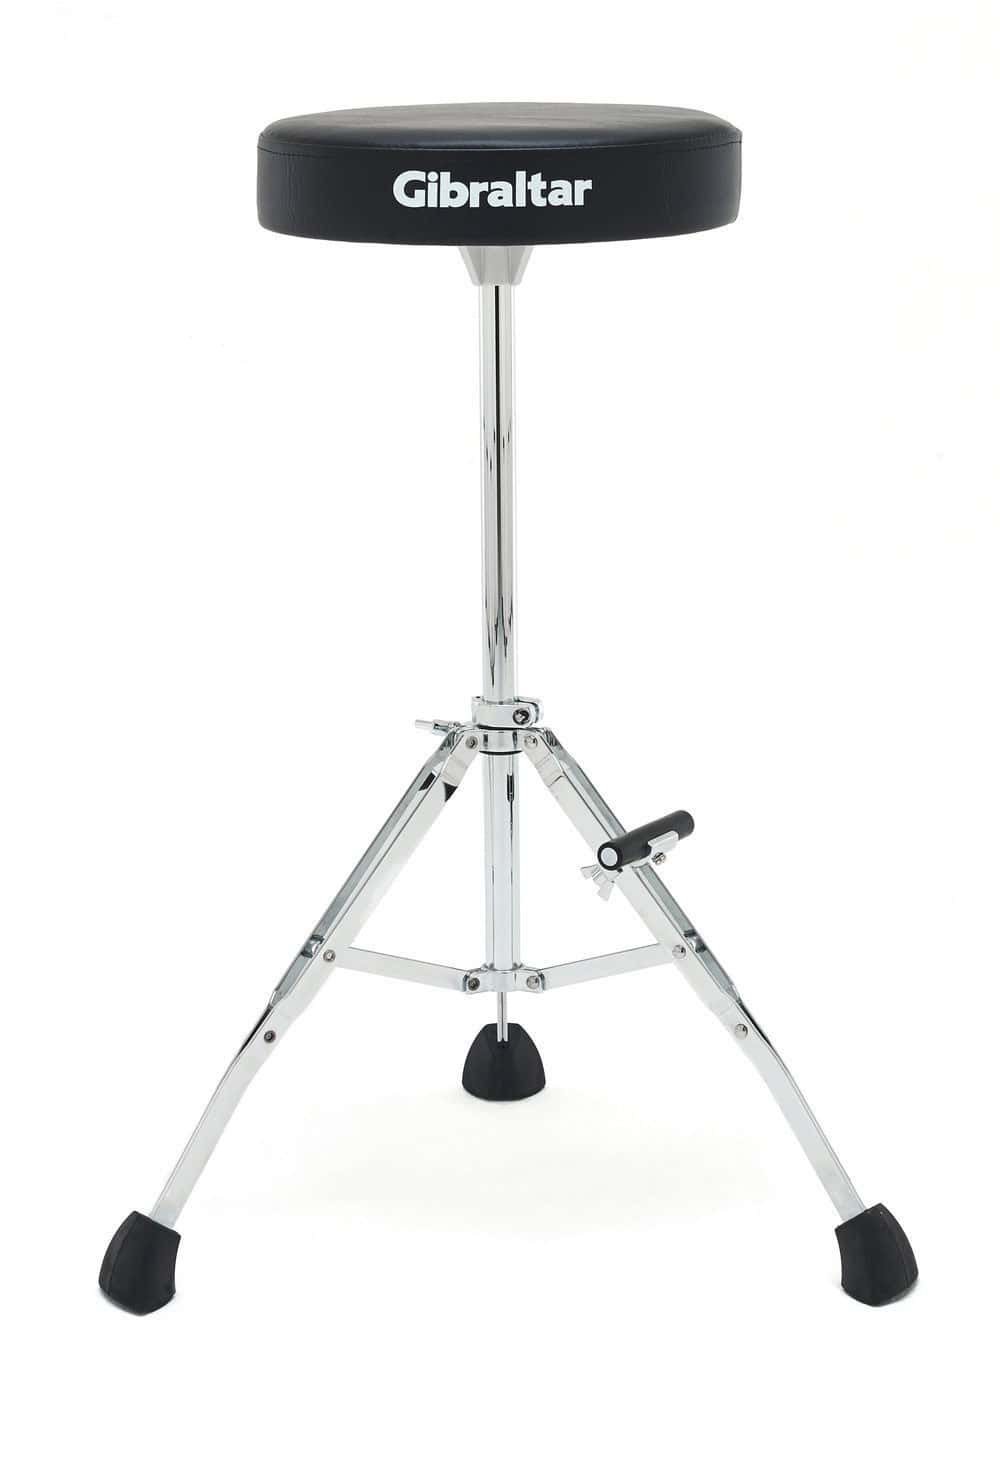 GIBRALTAR DRUM THRONE COMPACT PERFORMANCE GGS10T